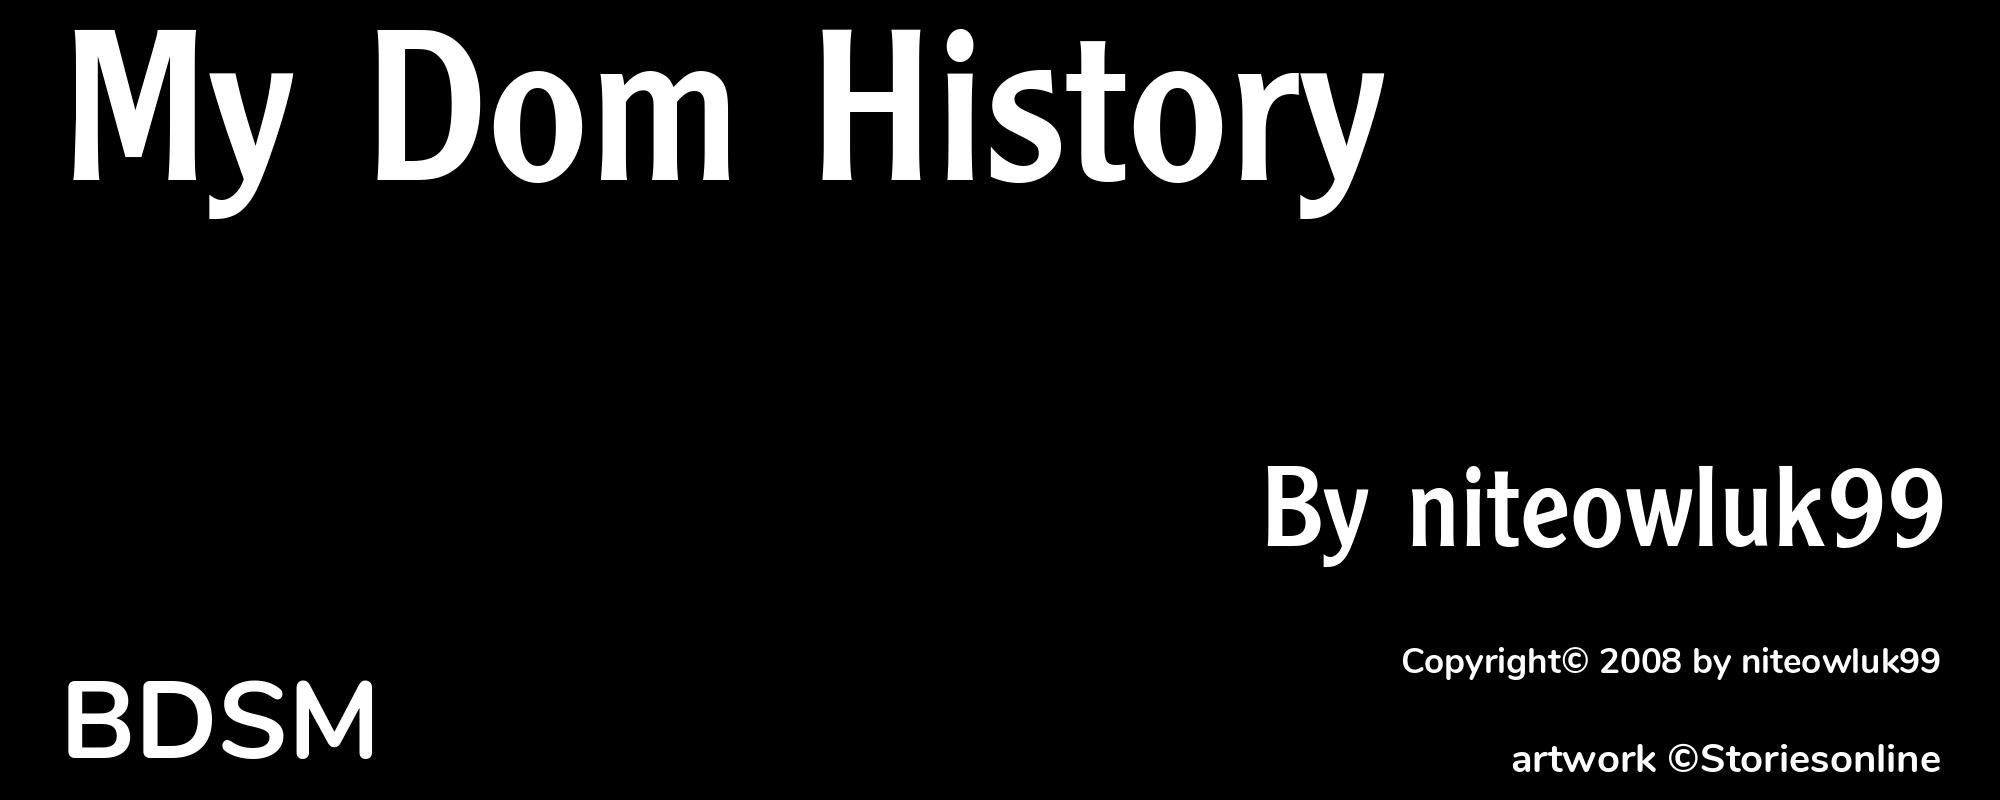 My Dom History - Cover